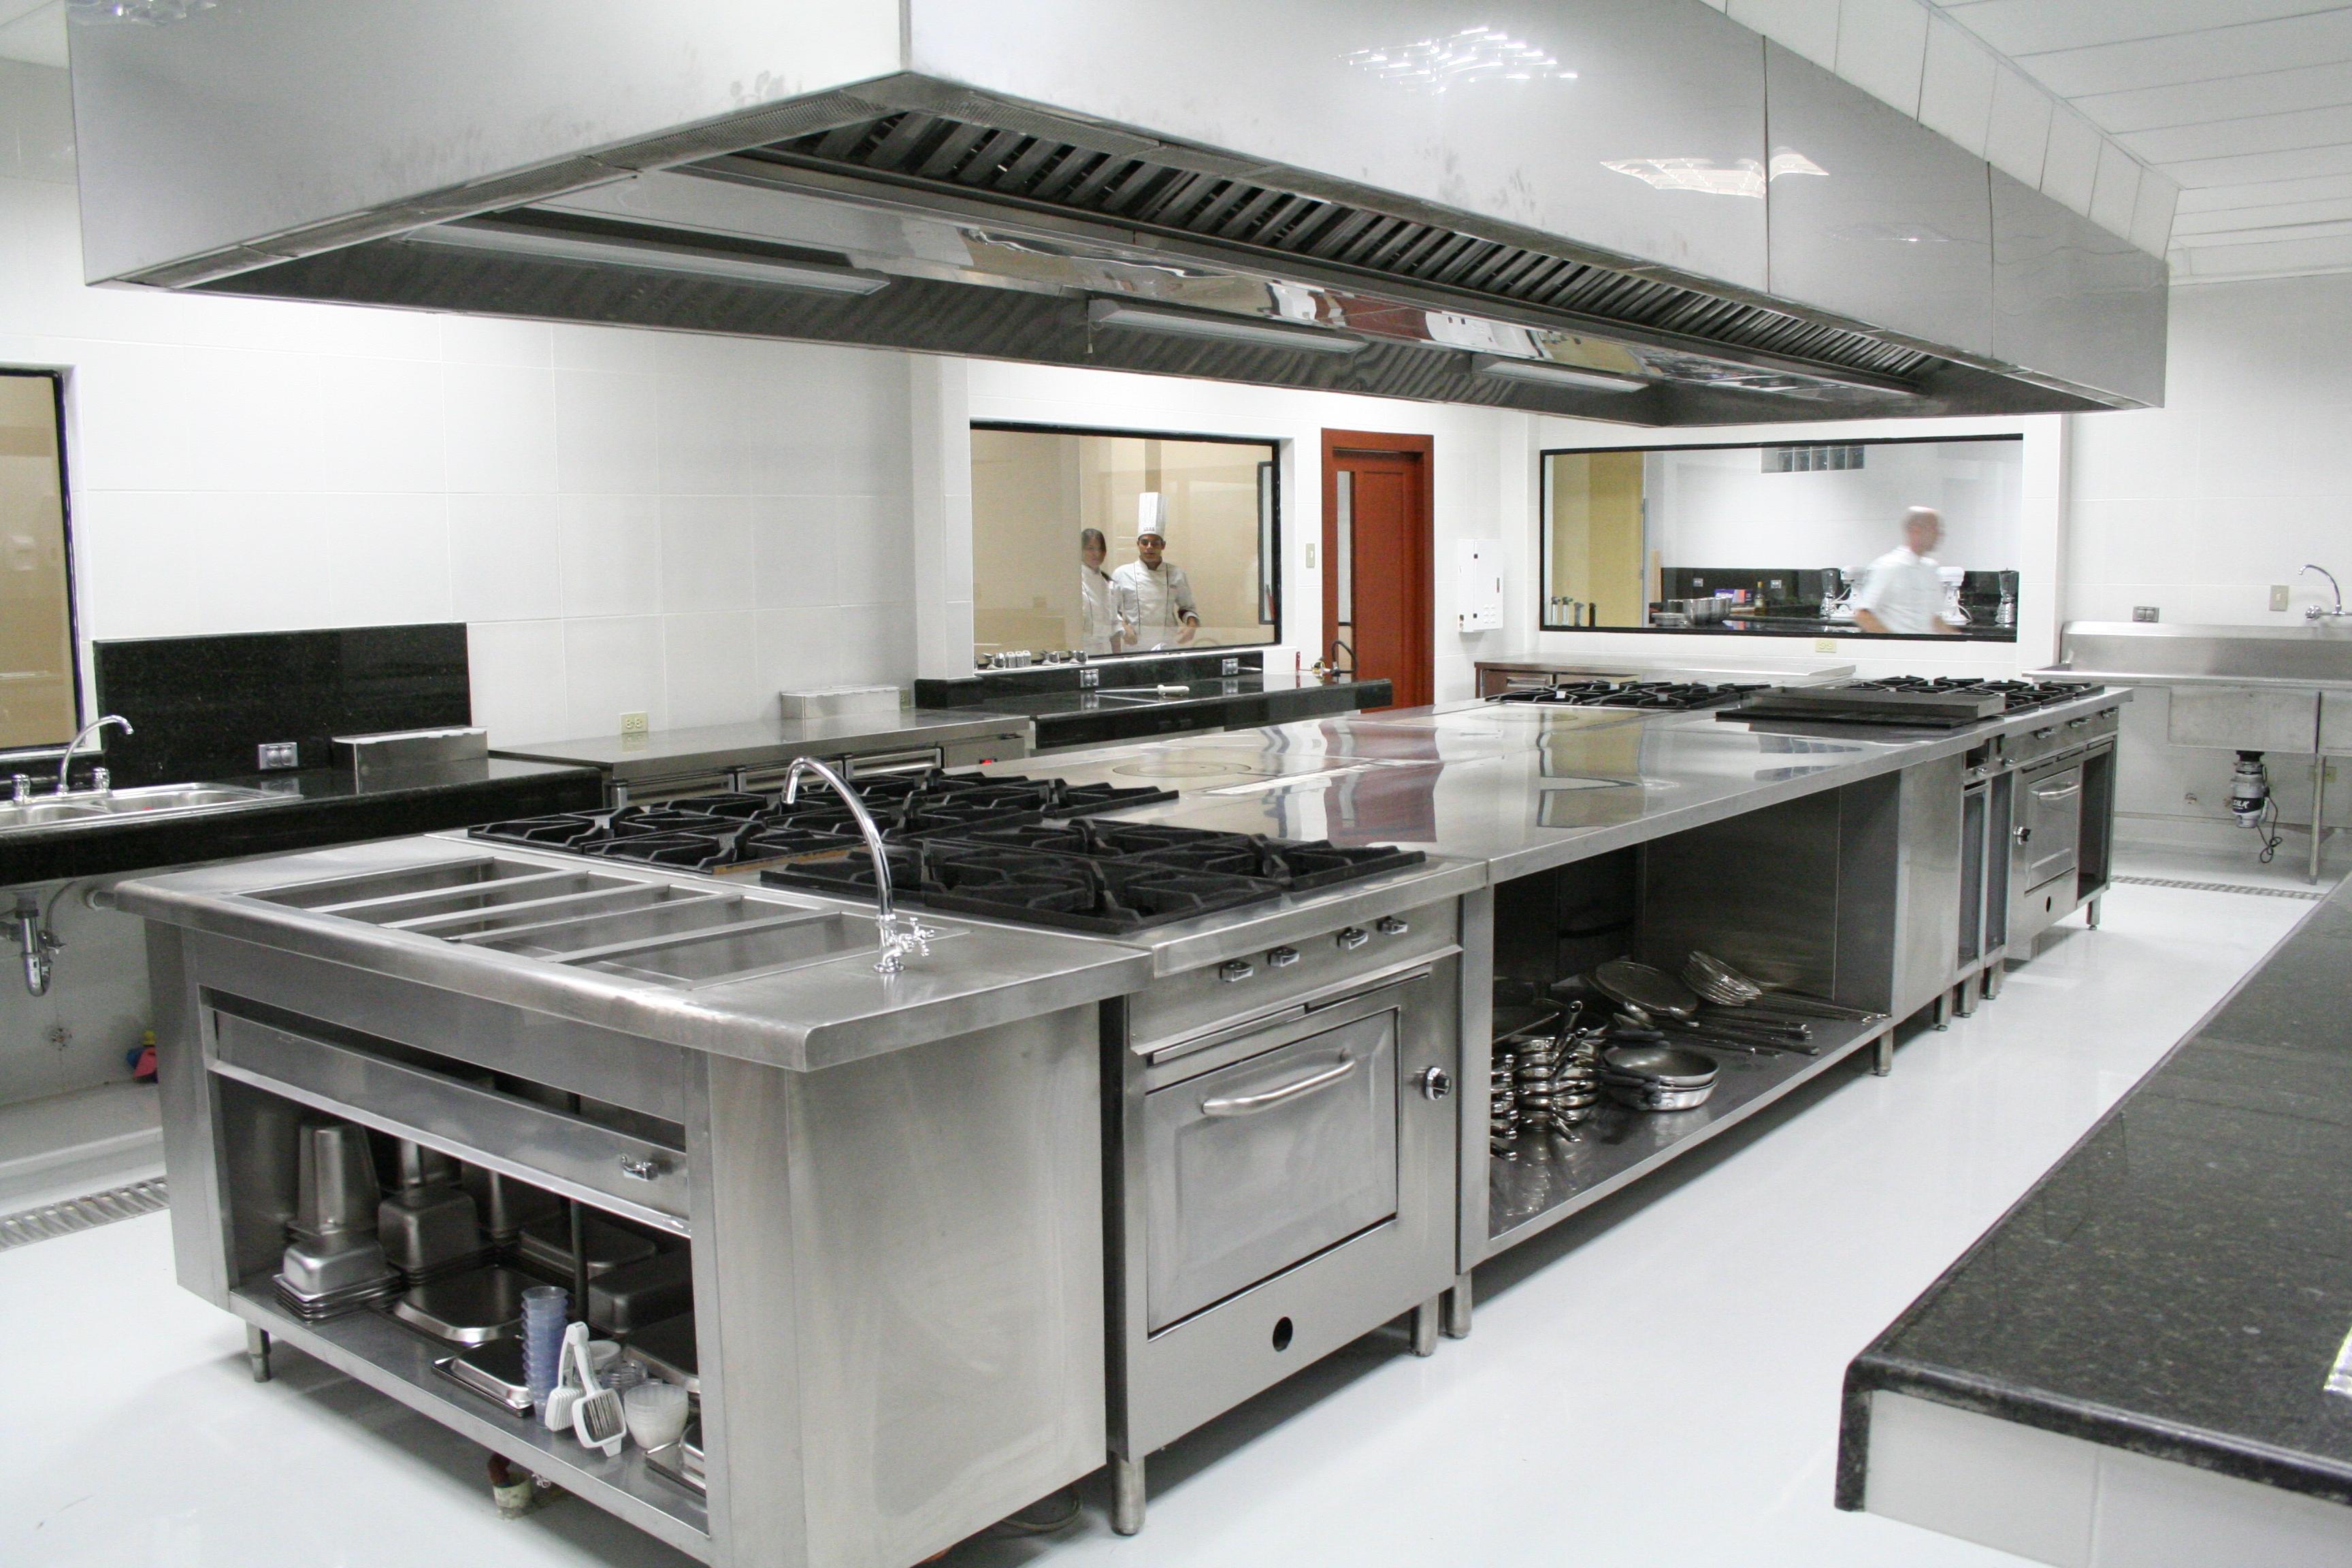 How to plan a commercial kitchen design? | HireRush